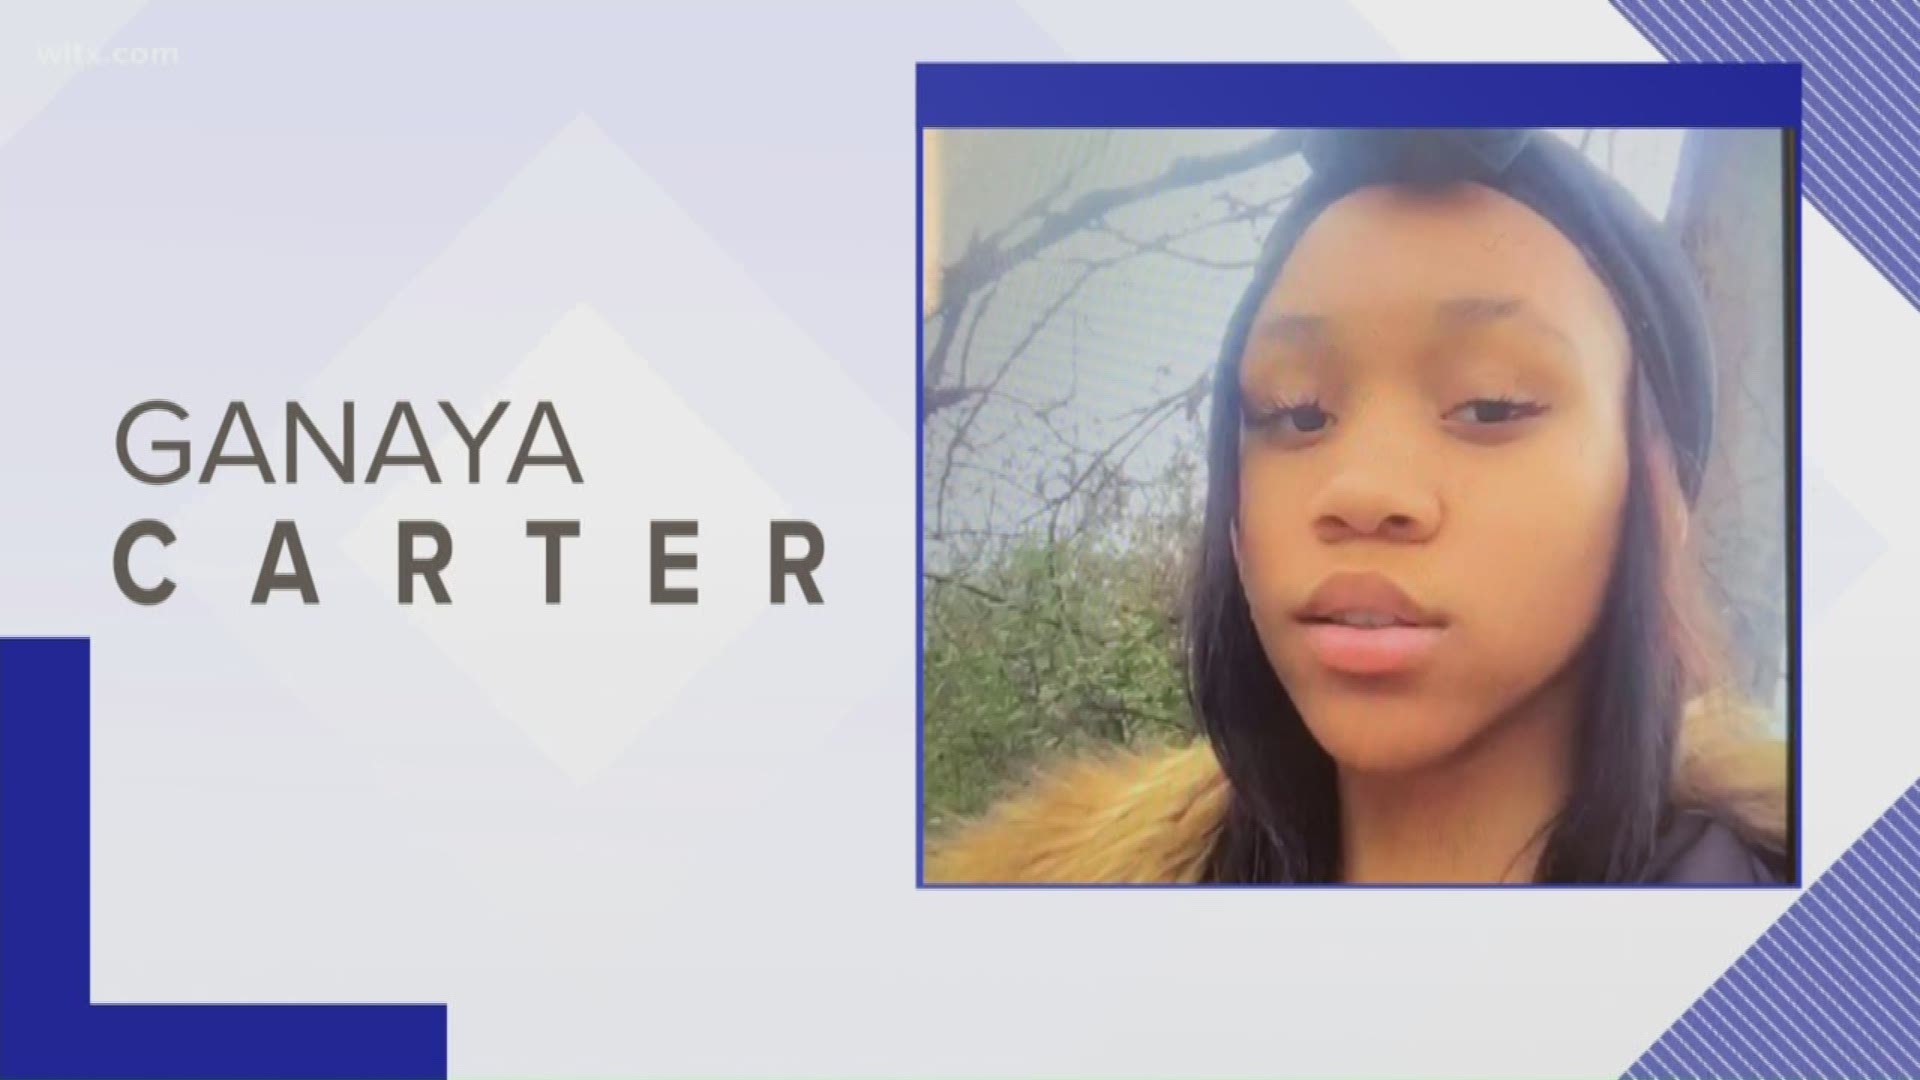 Ganaya Carter, 16, was last seen at her Florence home on or about Saturday, March 21, 2020.